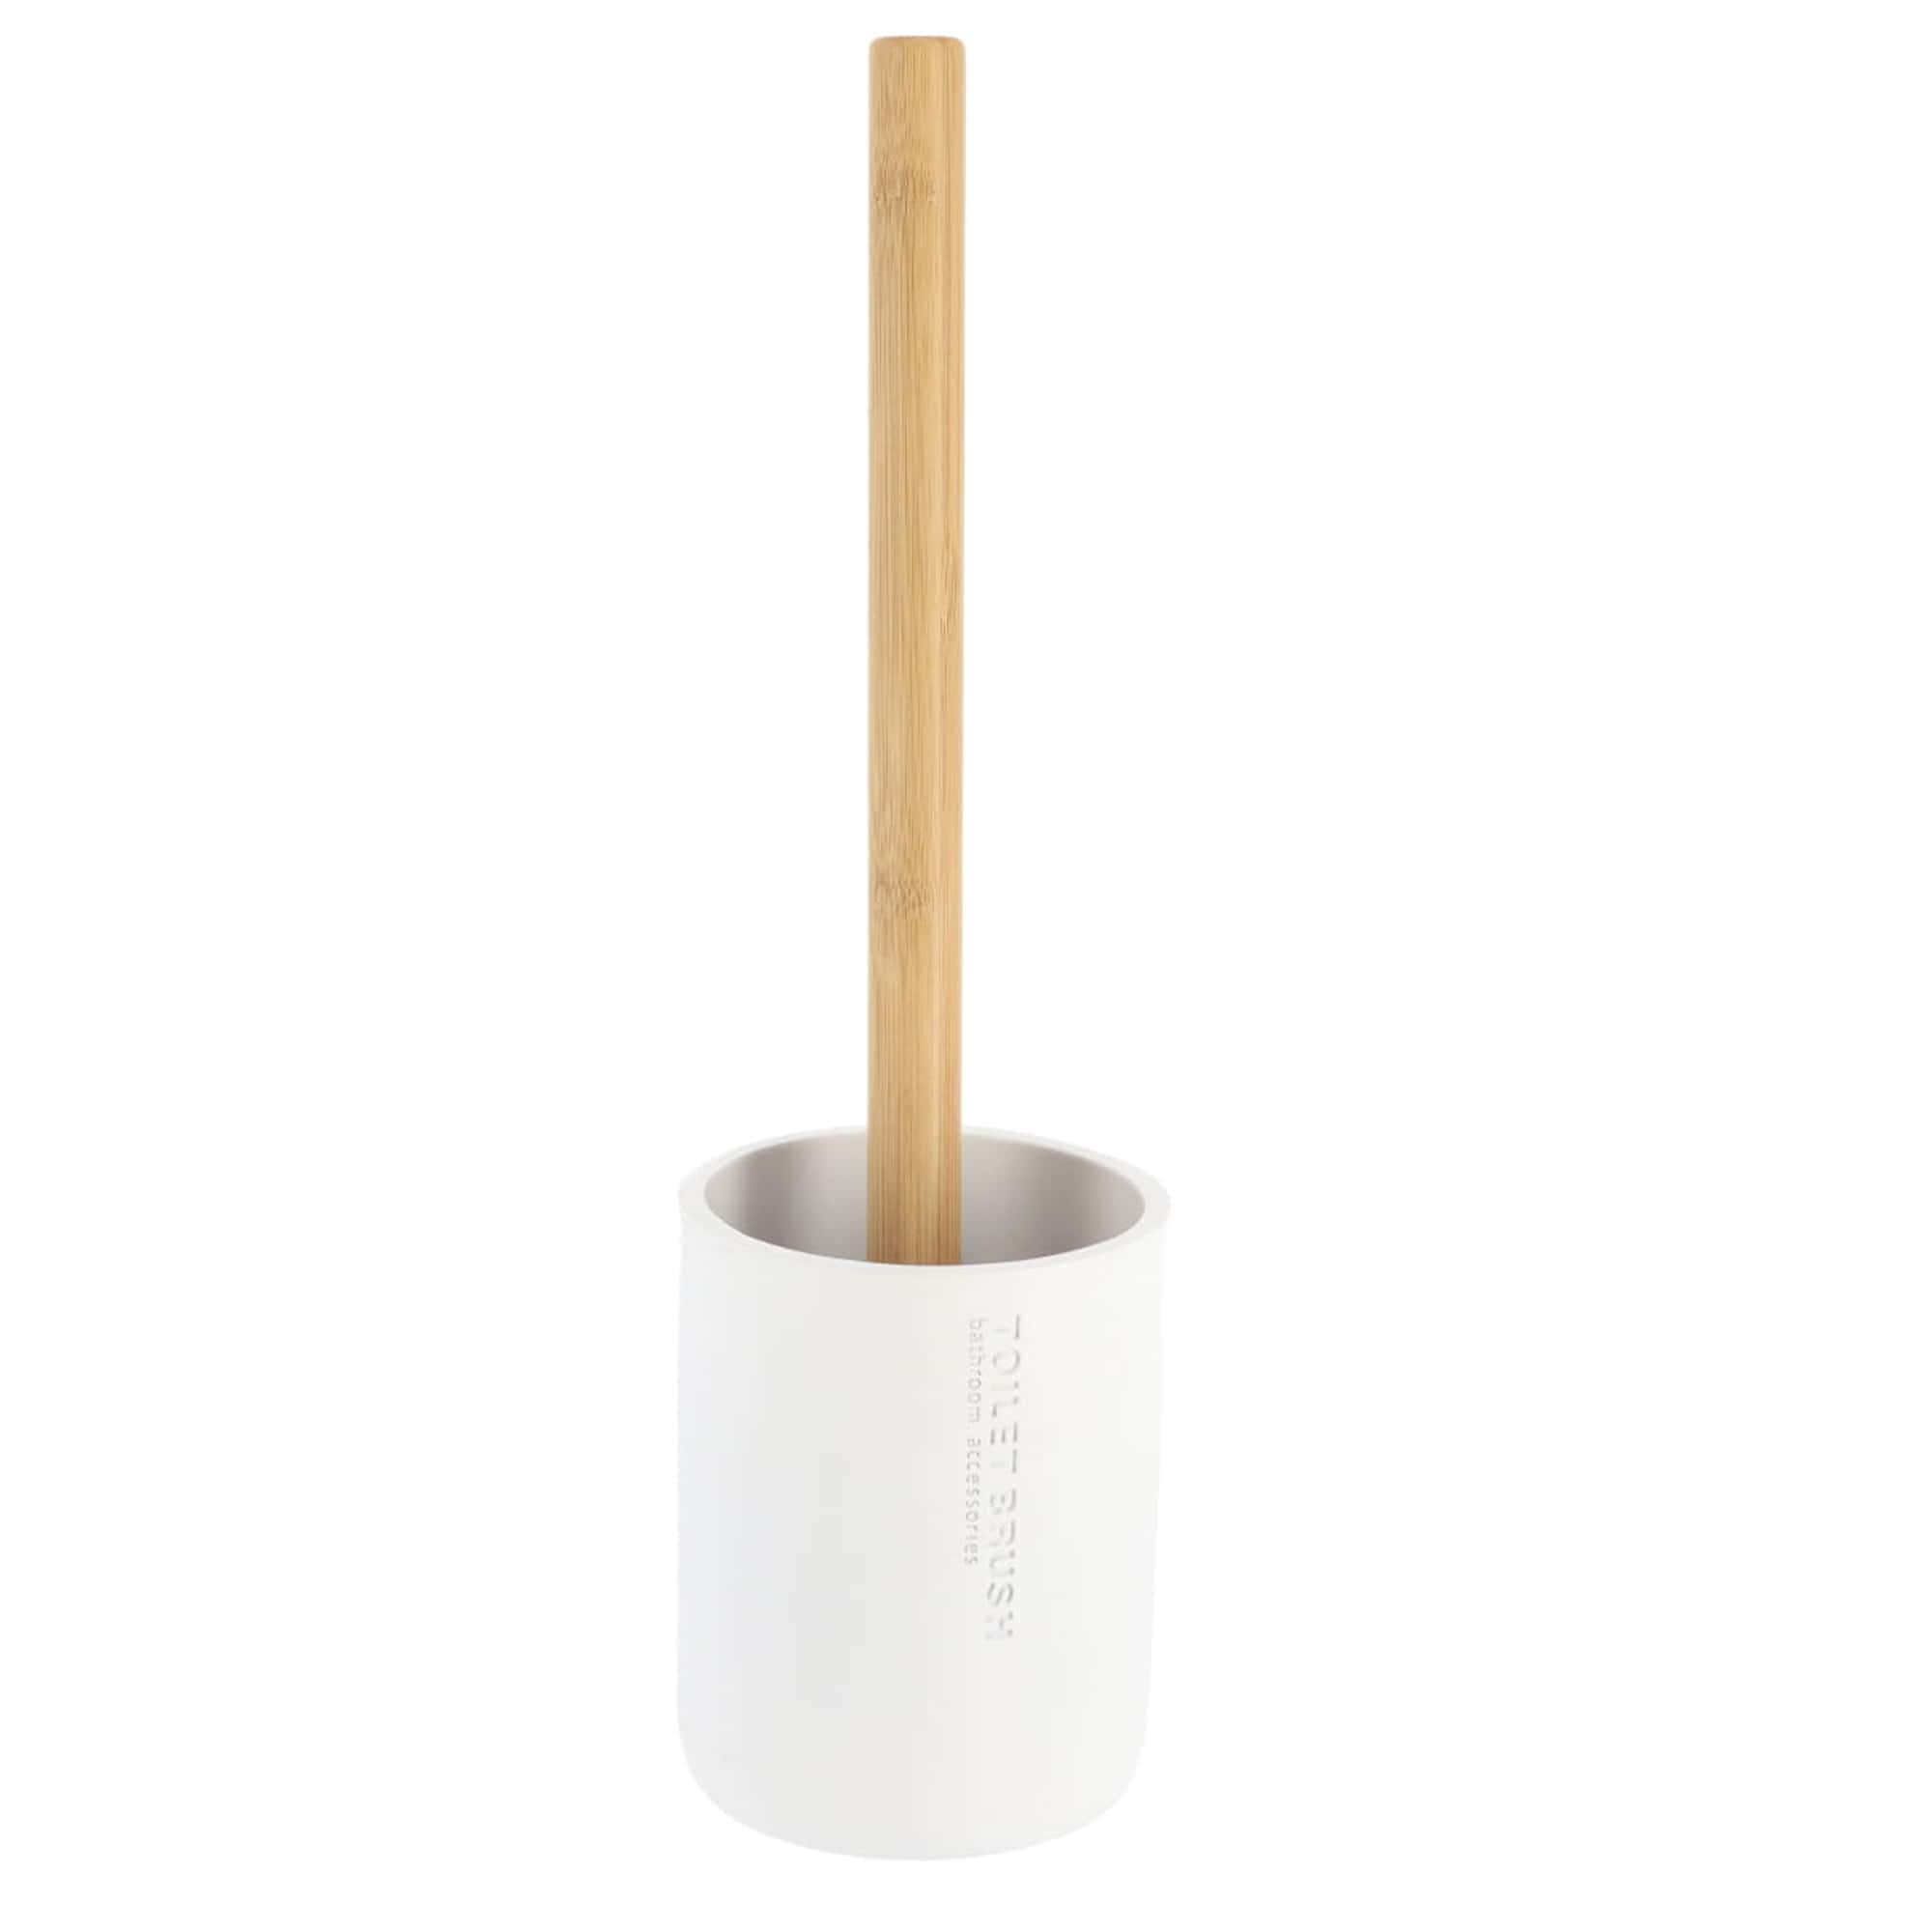 Pure Matte White Toilet Brush Set with Natural Bamboo Handle Polyresin Bathroom Essential